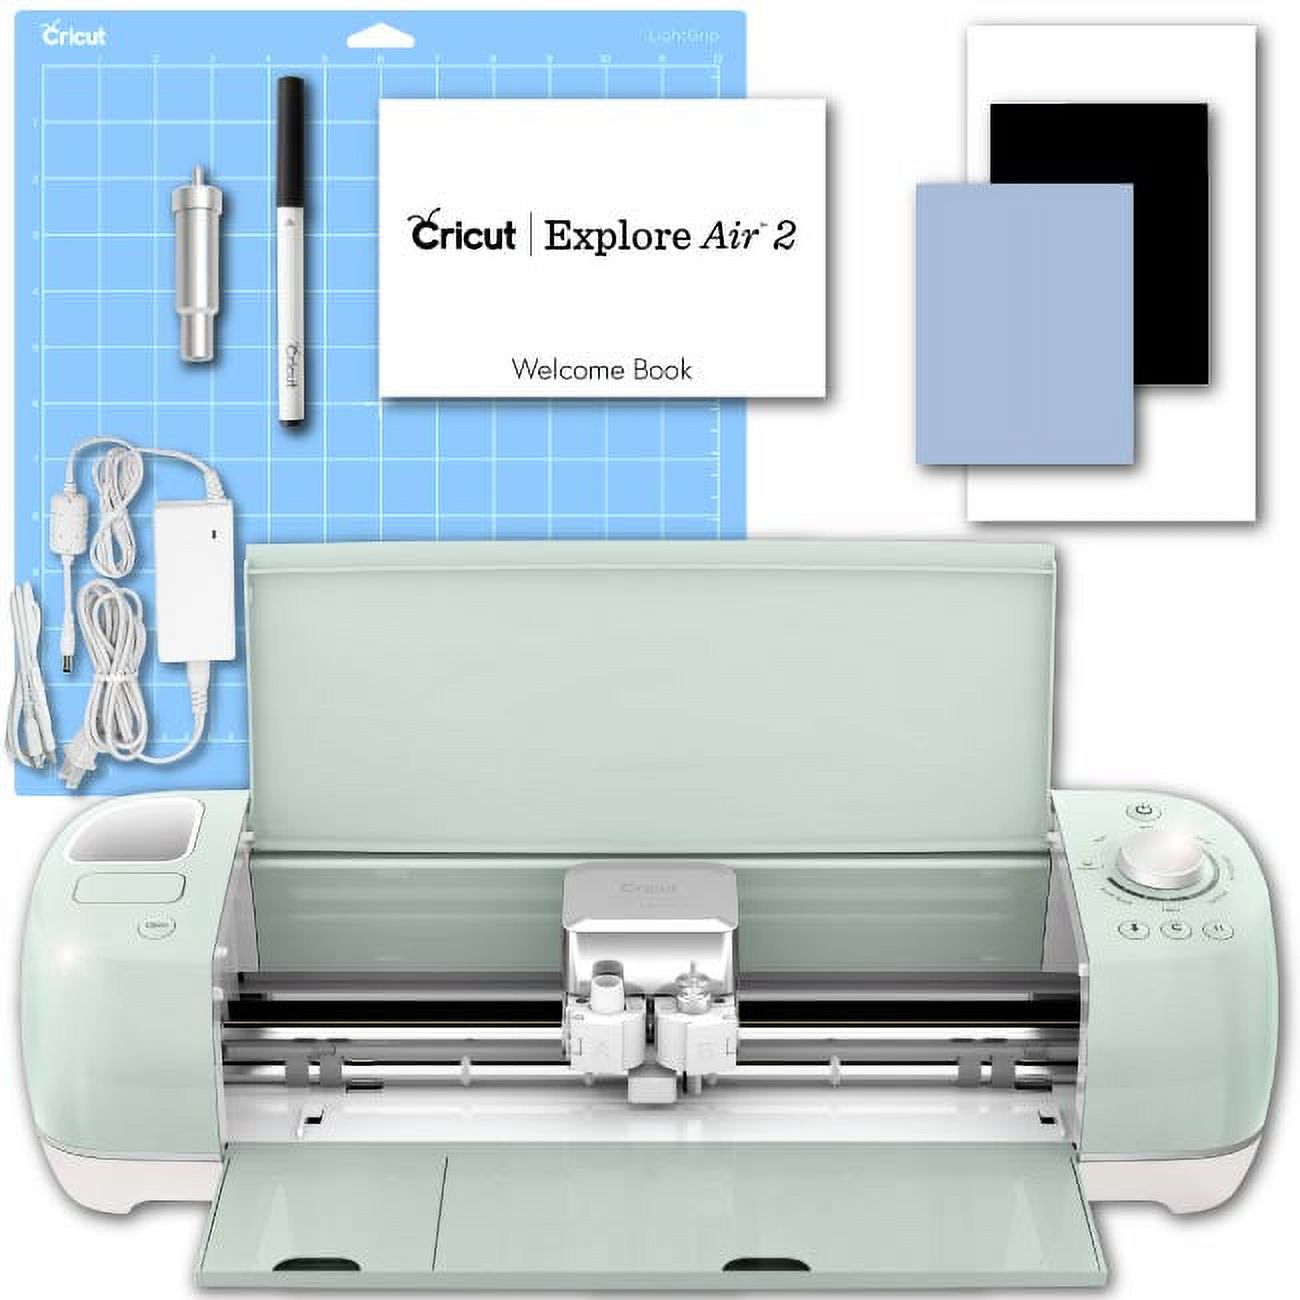 Cricut Explore Air 2 Machine with Iron-On and Vinyl Sampler Packs, Tool Set and Pens Bundle - image 3 of 7